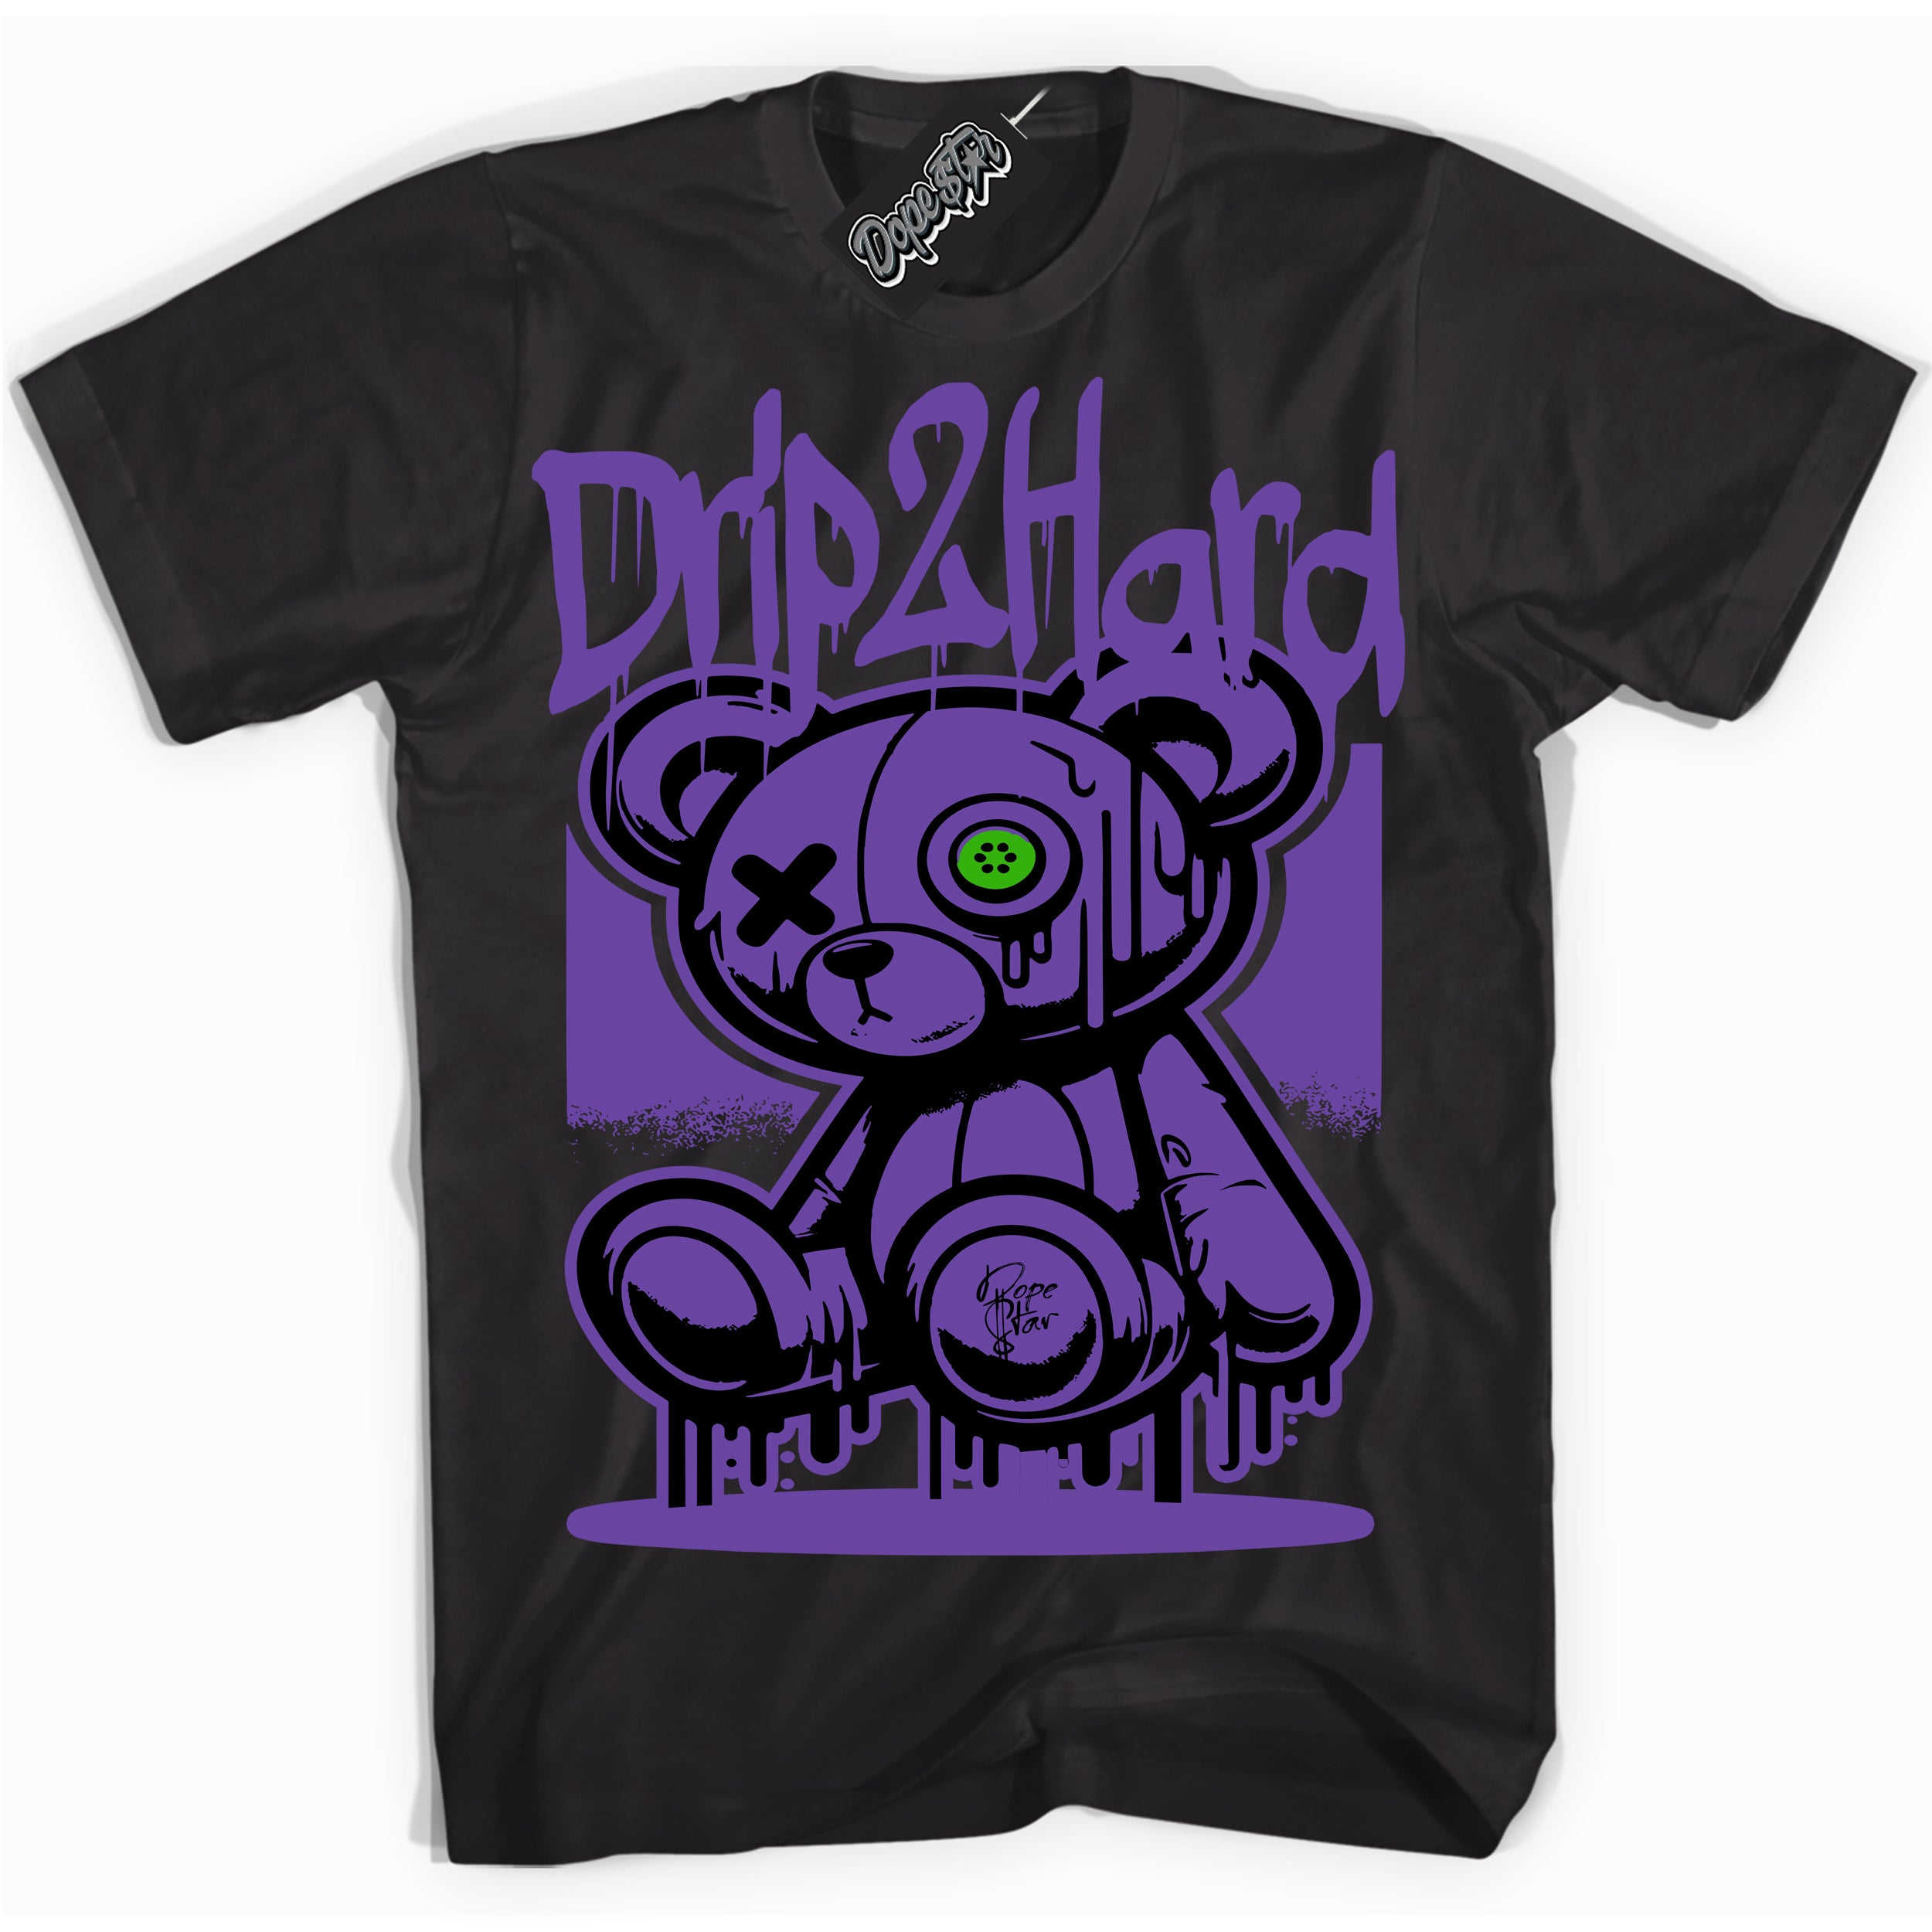 Cool Black graphic tee with “ Drip 2 Hard ” design, that perfectly matches Court Purple 13s